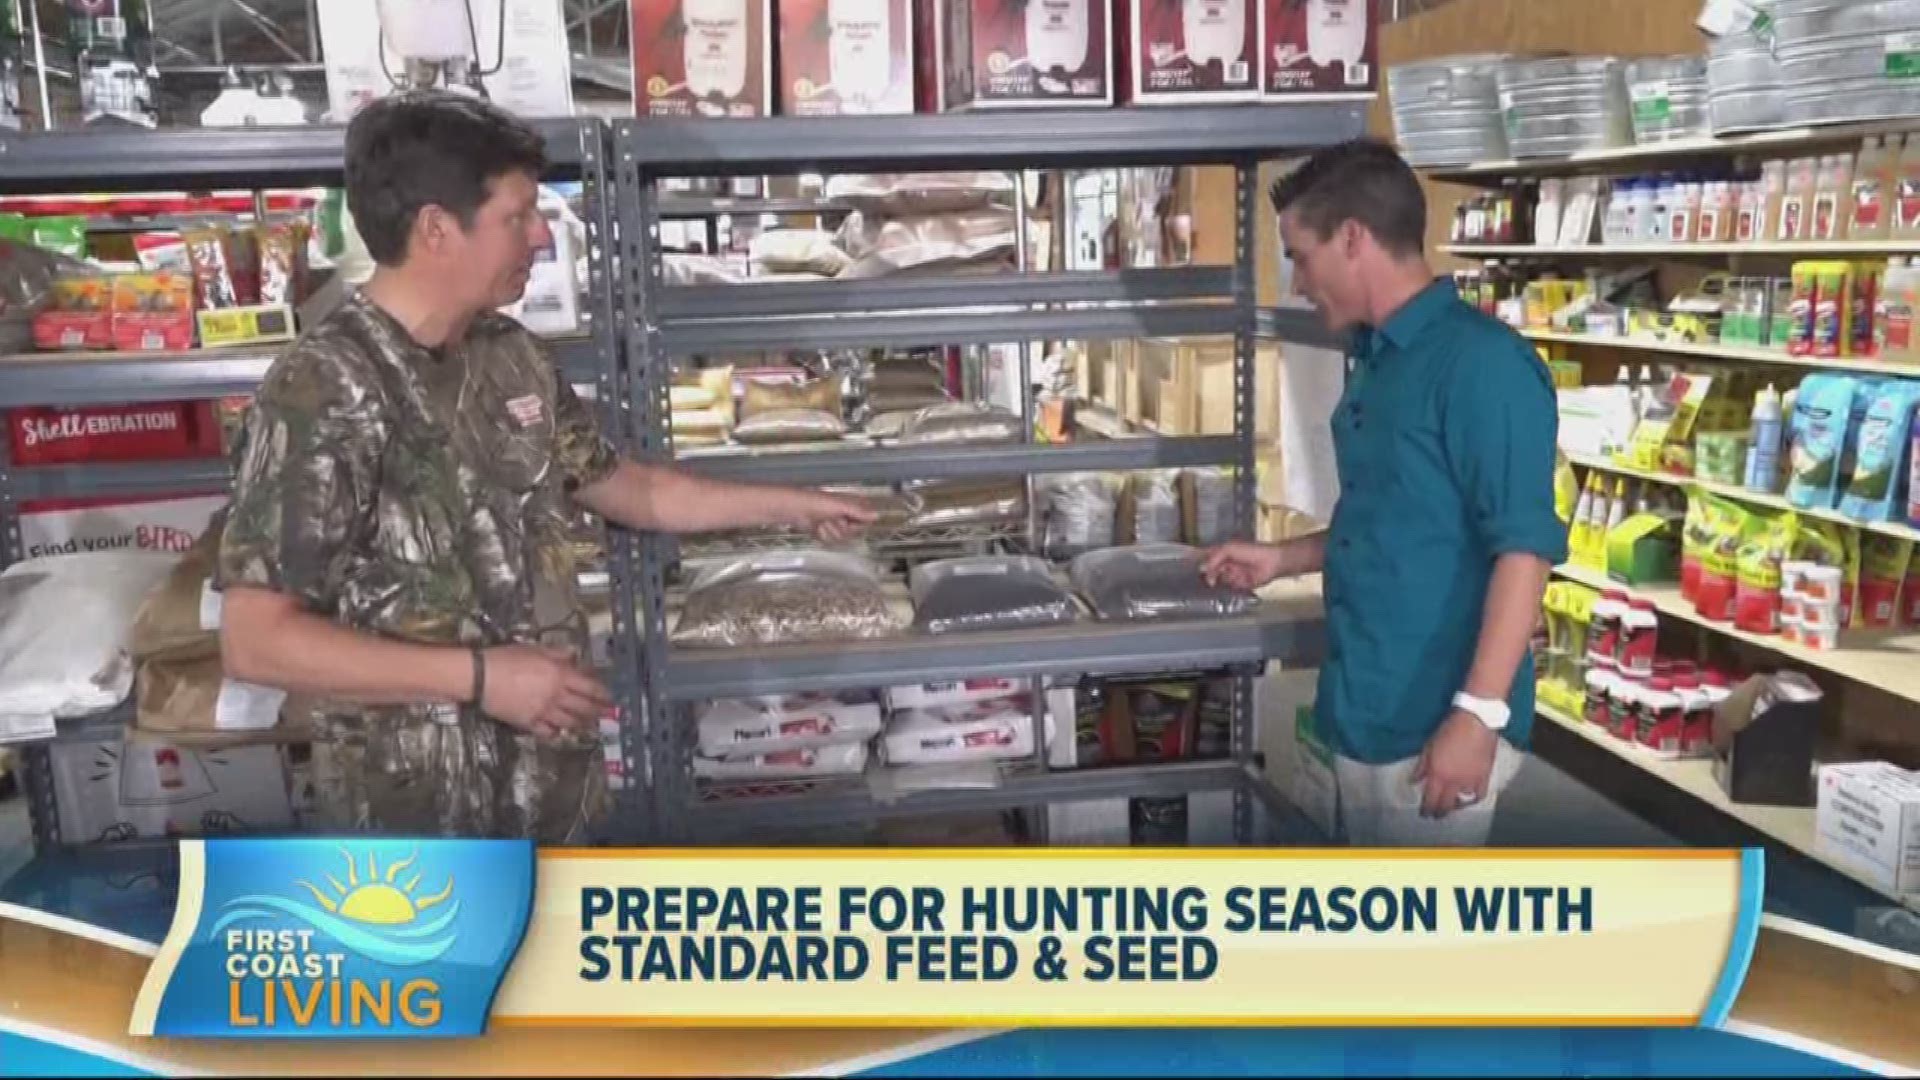 Standard Feed and Seed is here to help you properly prepare no matter what you're on the hunt for.